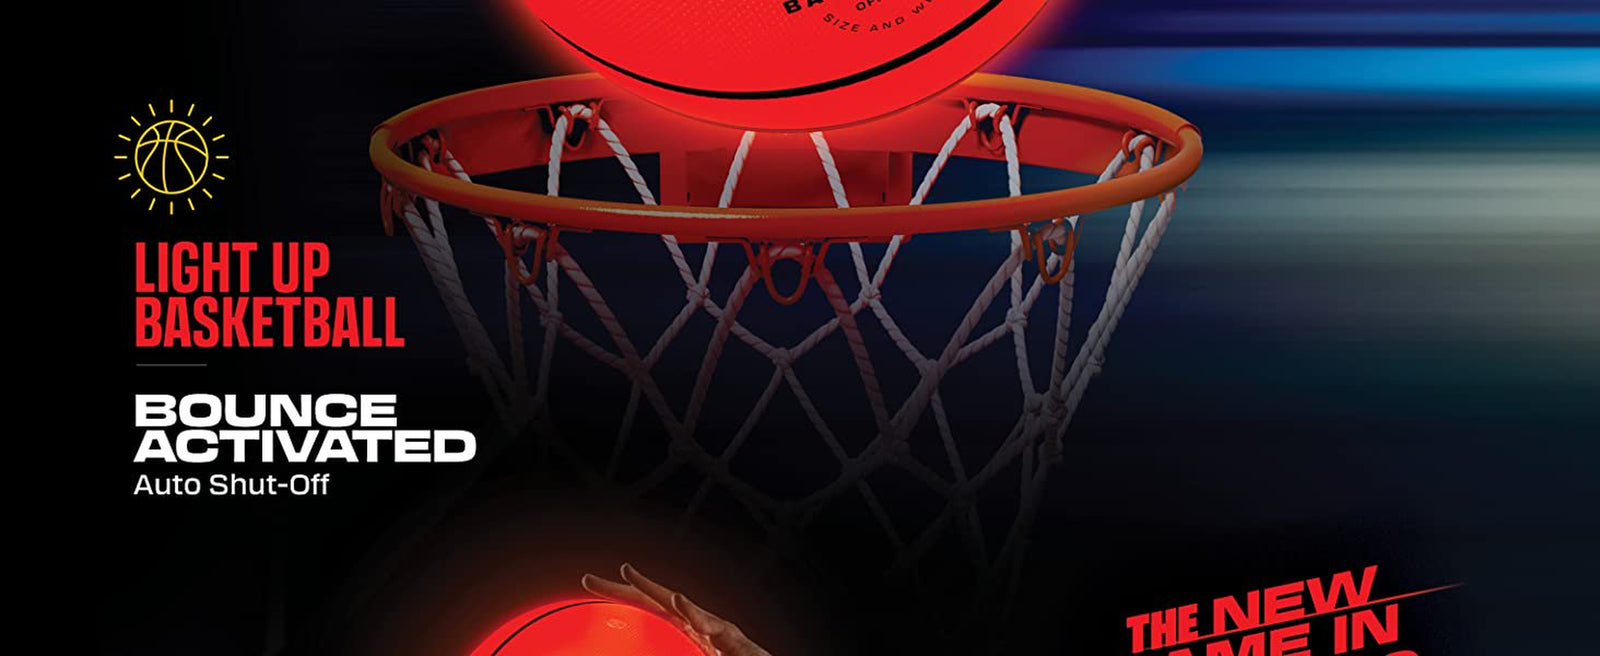 Light up Basketball - Glow in the Dark Basketball - NO 7 - Sports Gifts for Boys & Girls 8-12+ Year Old - Kids & Teens Gift Ideas - Cool Boy Toys Glowing Ball Night Activity